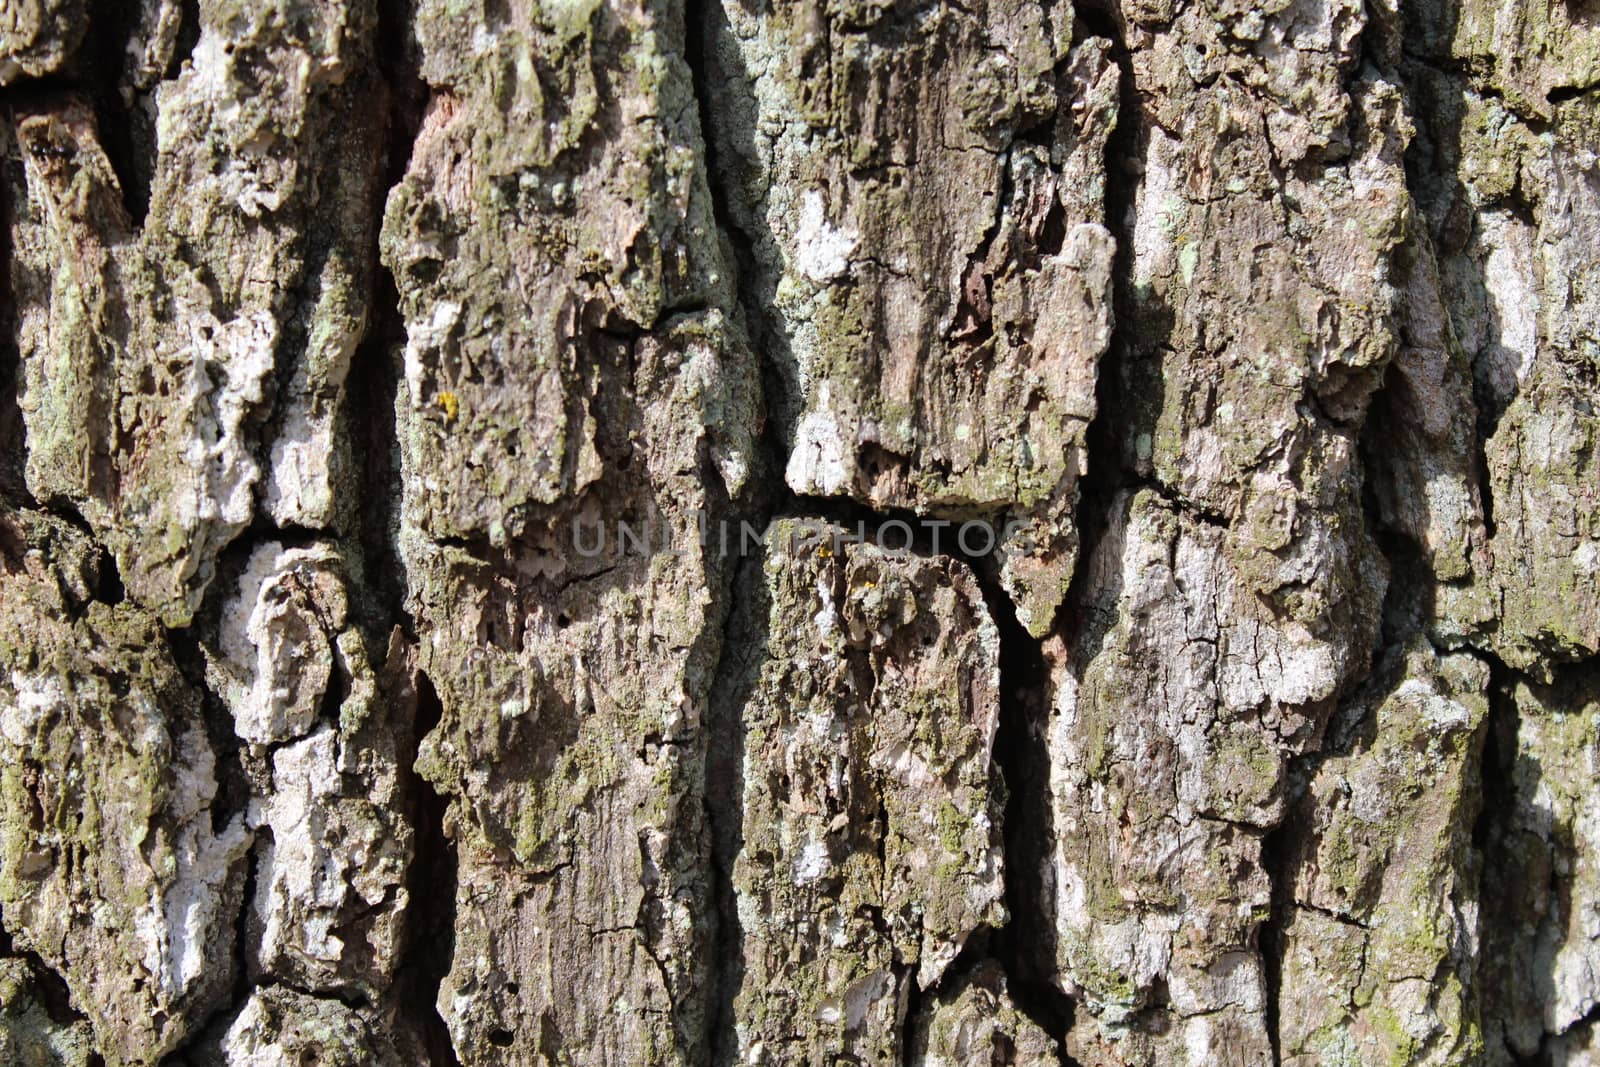 The picture shows a brown tree bark.